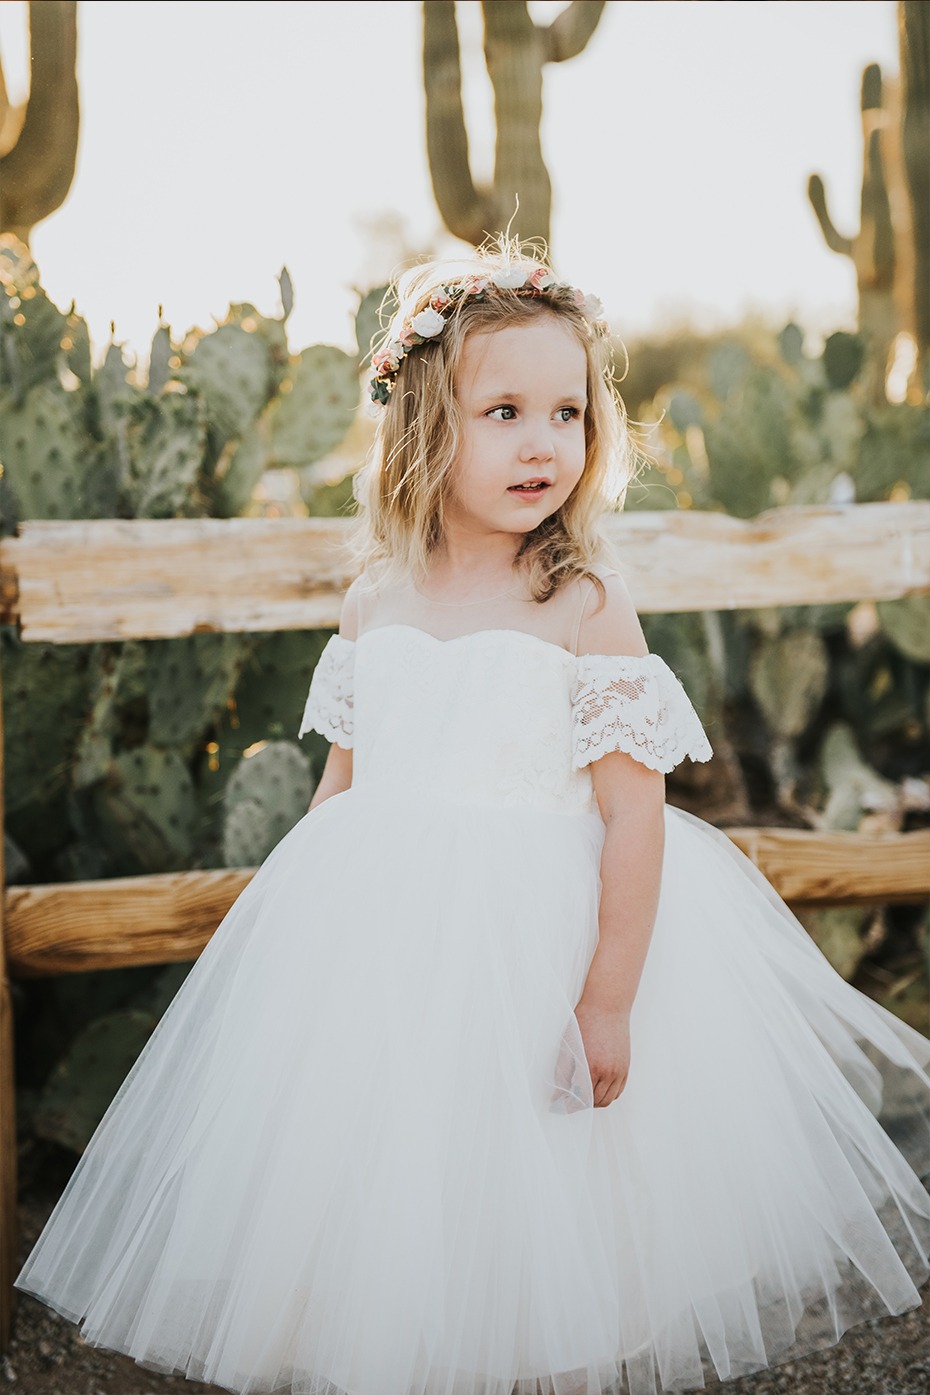 Fattiepie Flower Girl Dresses Photo by Jacquilyn Avery